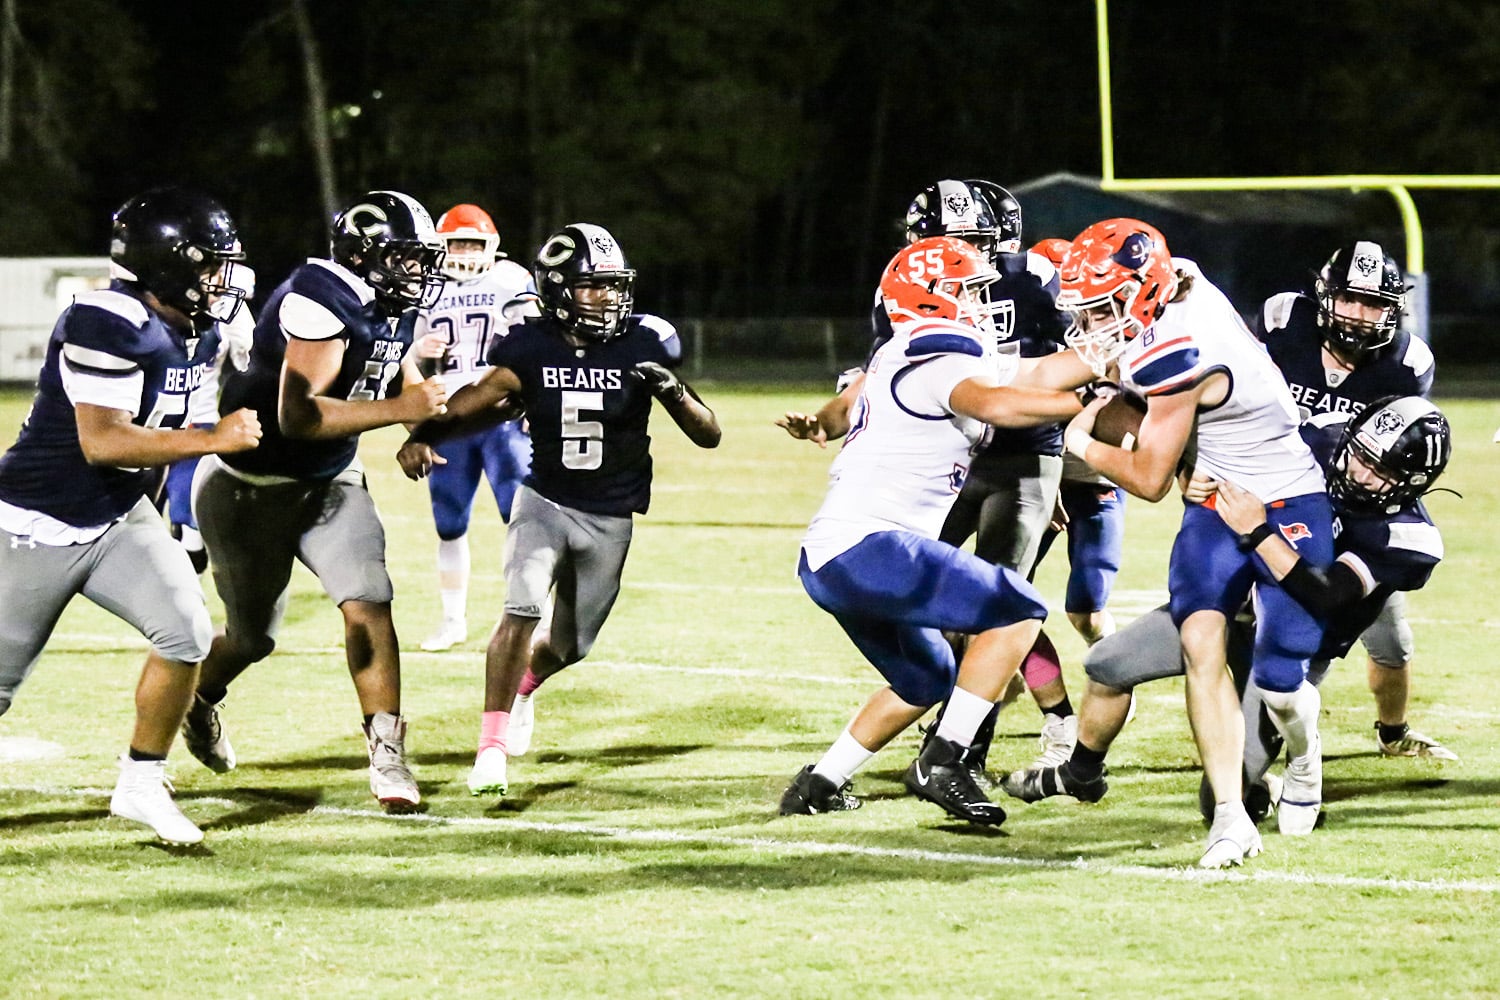 Bears No 11 Tyler Thorne (Fr) tackles Buccaneers No 8 Trevor Maddox Friday night's game, 10/14/22.